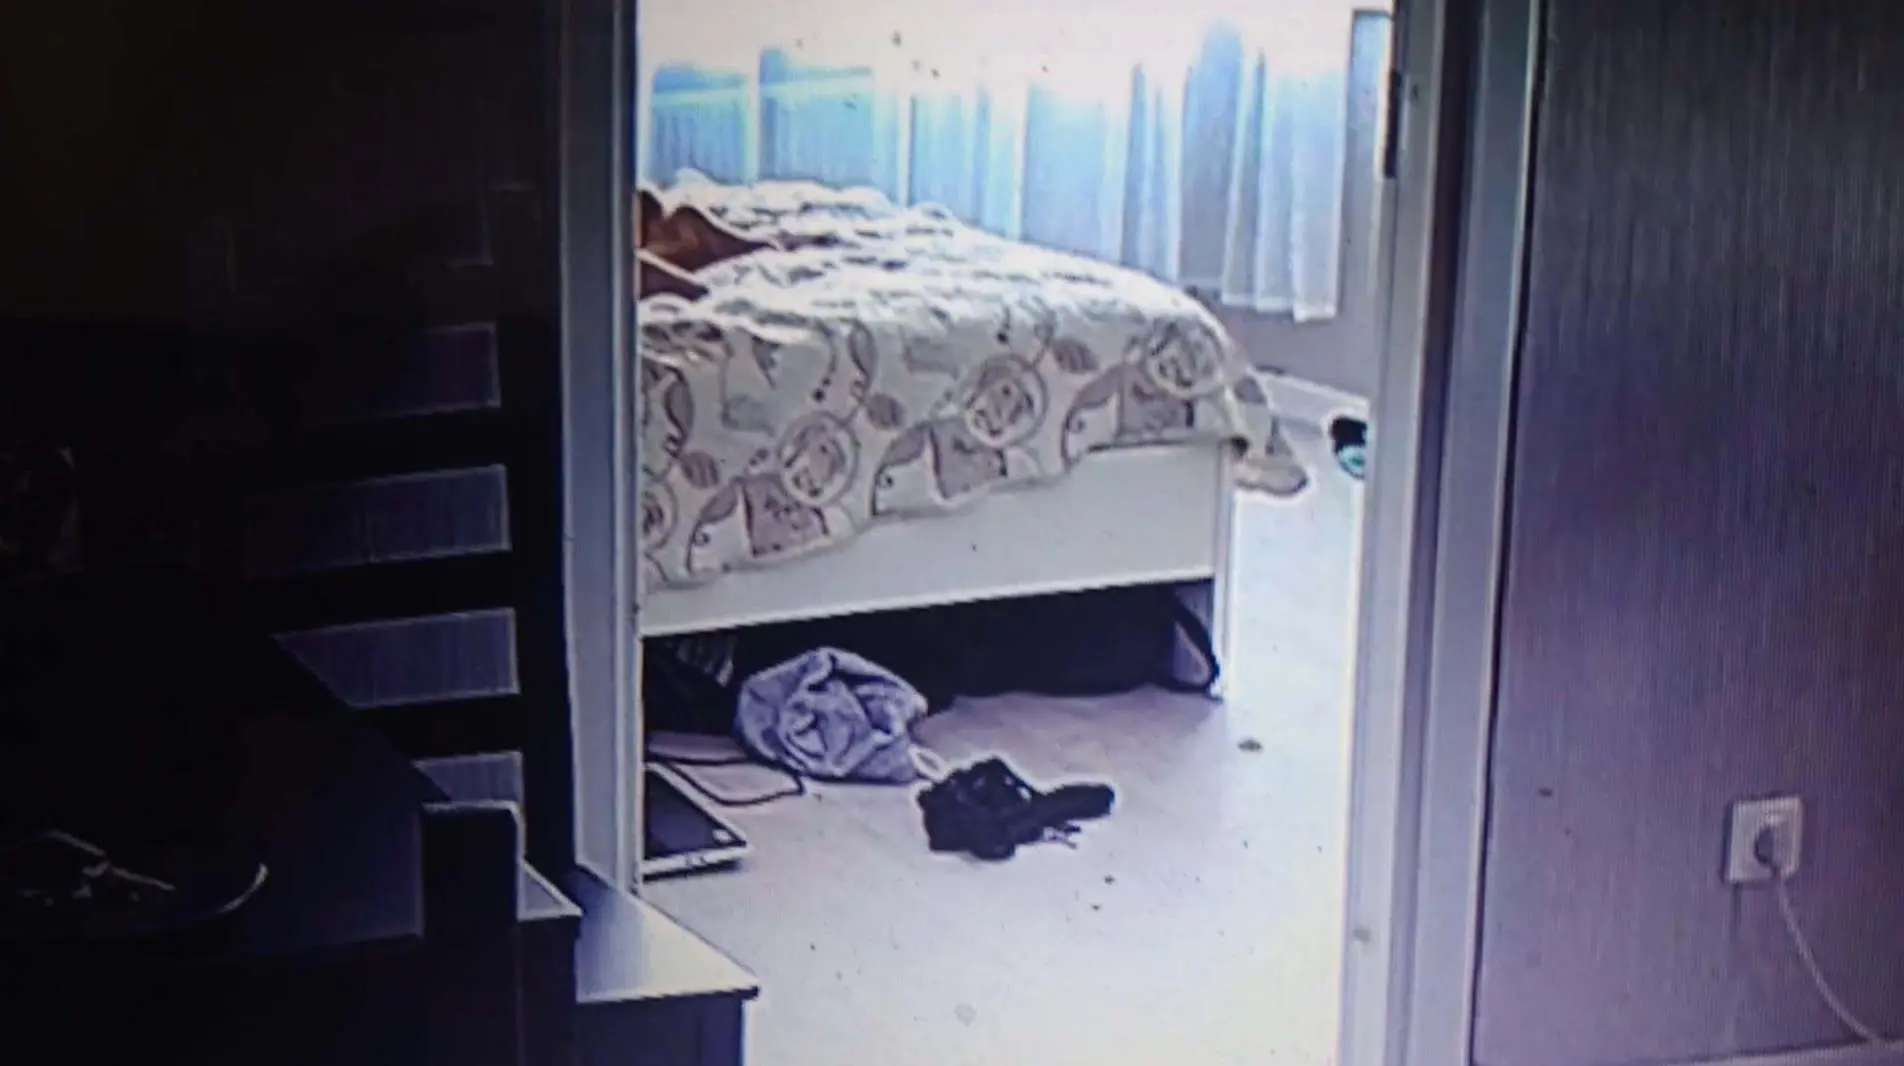 Couples have sex at home here in Spy-cam image